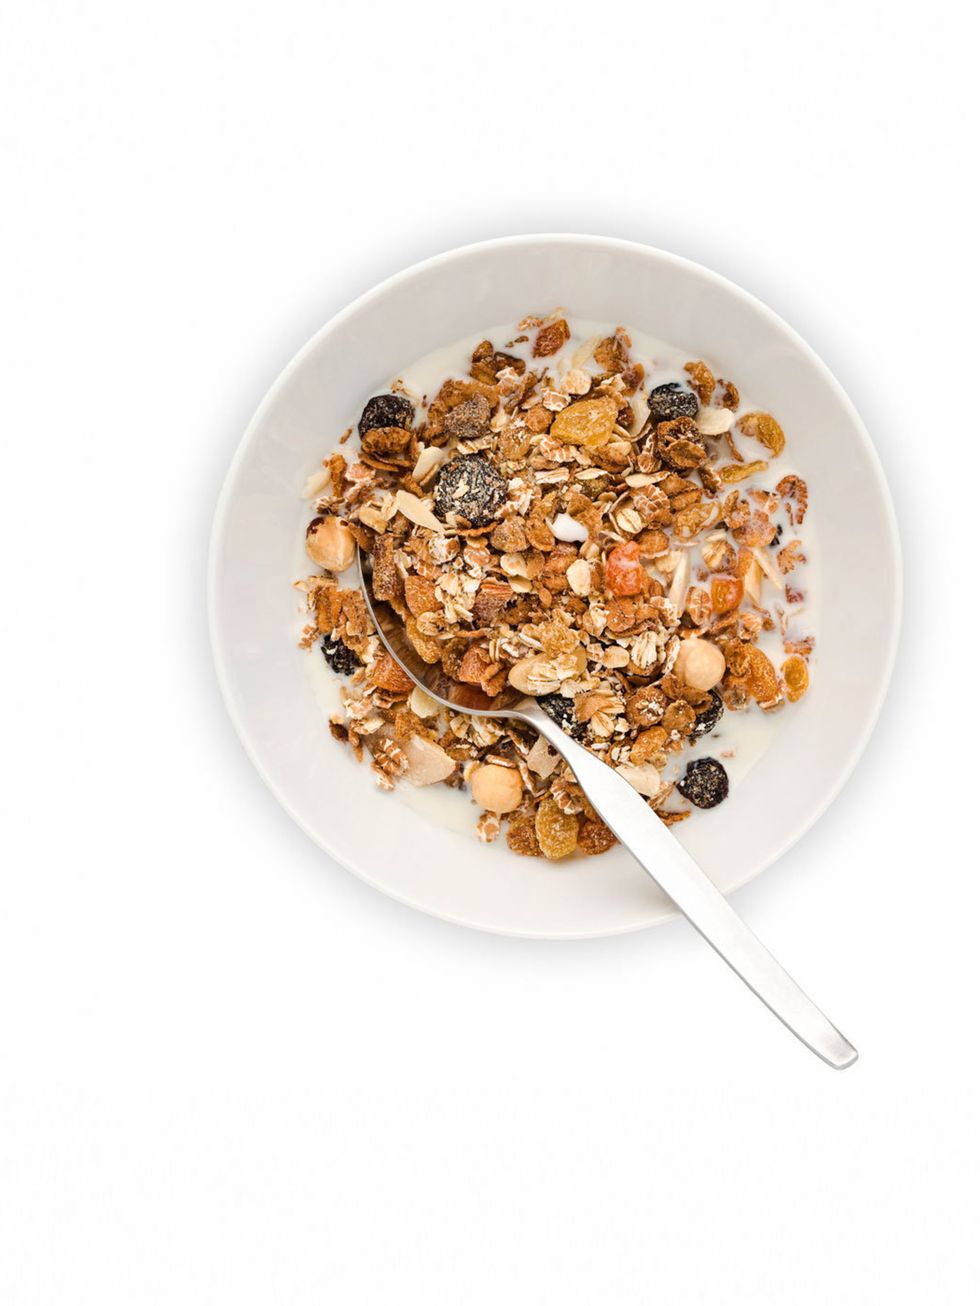 <p><em>Almond Breakfast muesli (Makes 8-10 portions)</em></p><p>ngredients 2 tbsp Natural yoghurt and berries/chopped fruits to serve with on the day.</p><p><strong>Method </strong>Prepare this at the weekend. First, preheat oven to 160c (140c fan, gas ma